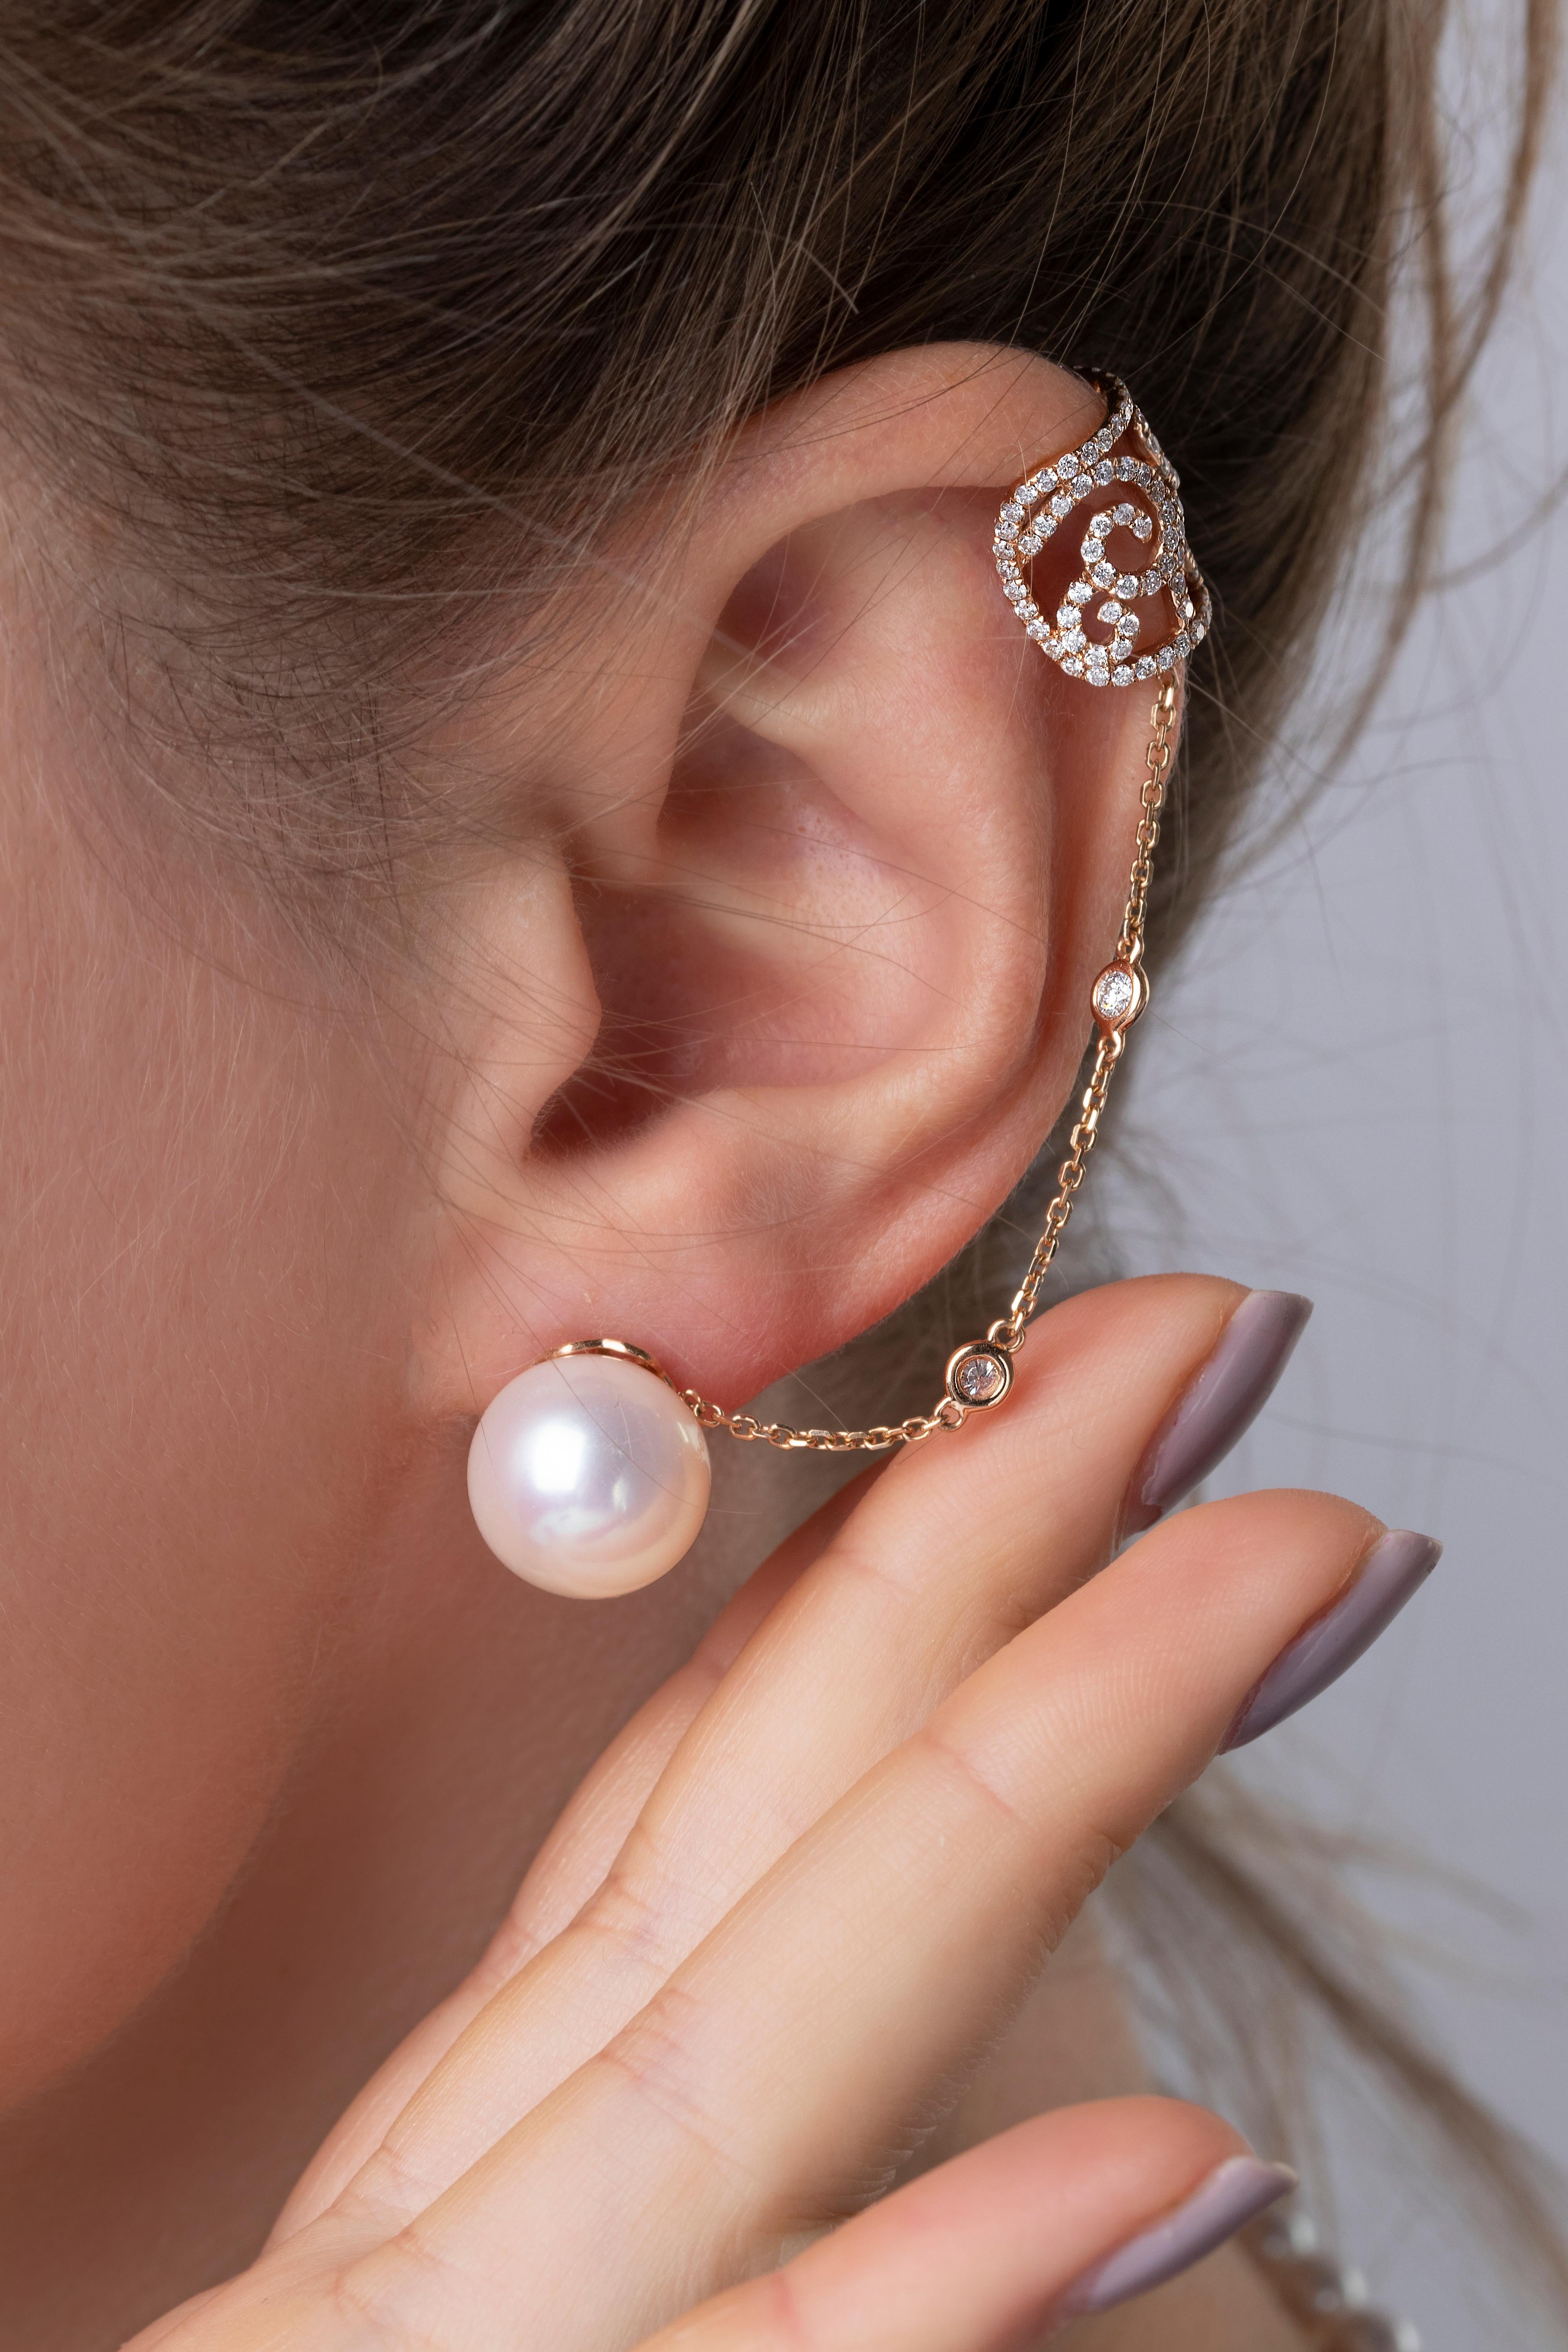 This contemporary ear earring by Yoko London features an exceptional Freshwater pearl attached to a diamond chain and ear cuff. The cuff simply slips over the top of the ear to create a striking and stylish look. Pair with a simple pearl or diamond